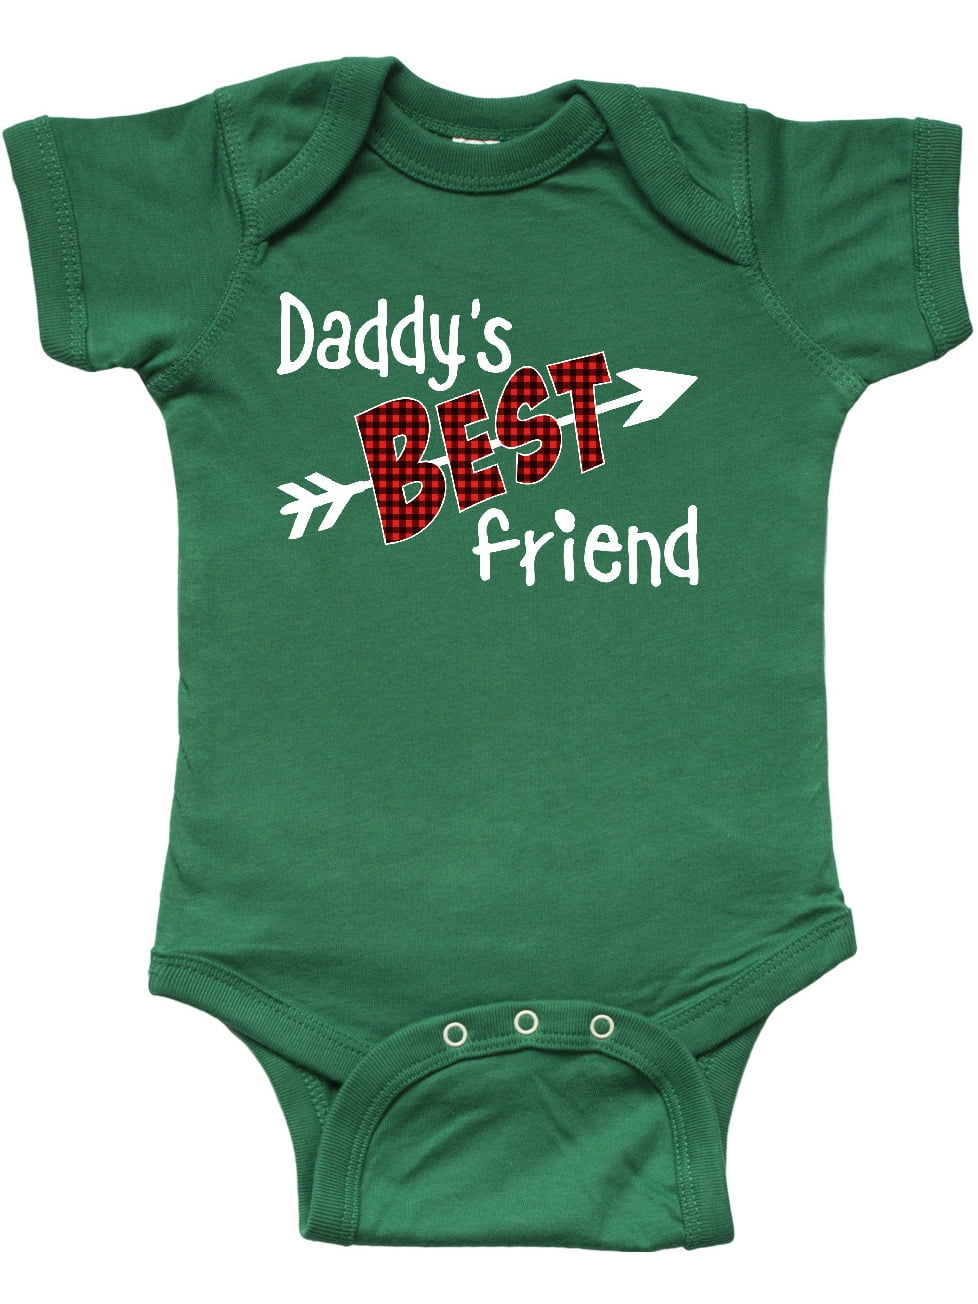 Arrow and Plaid Letters Infant Creeper inktastic Daddys Best Friend